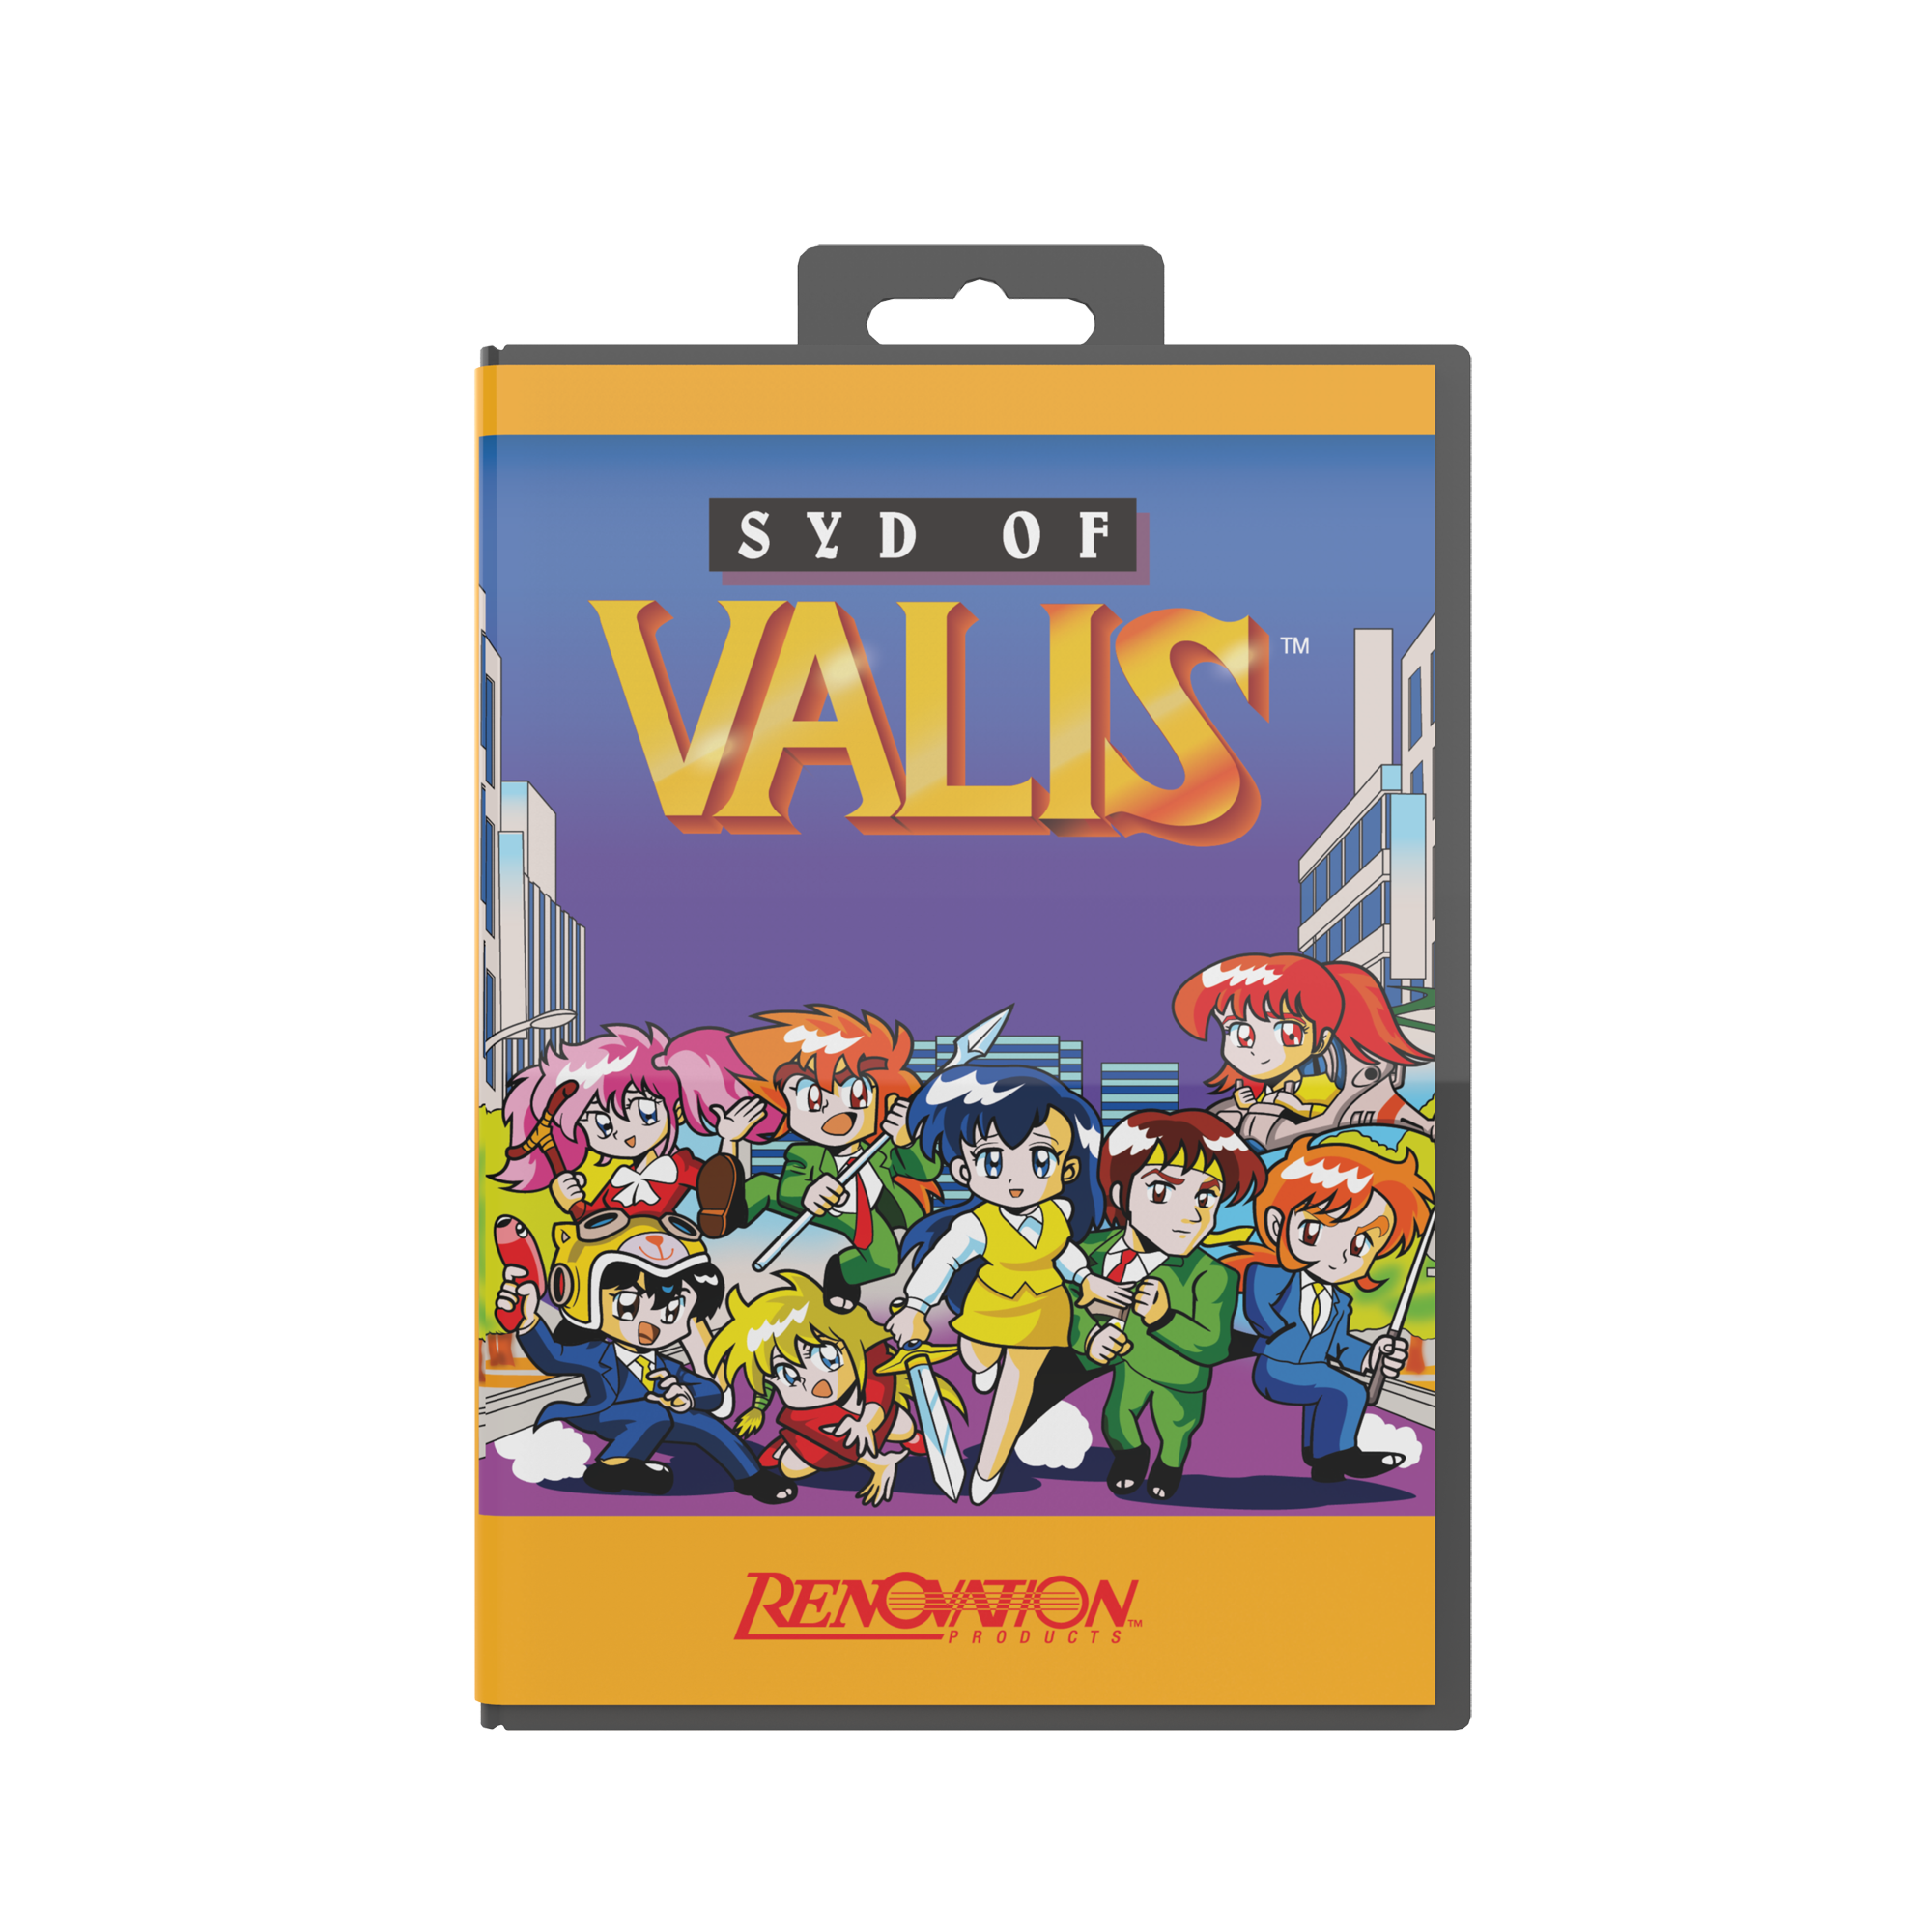 ValisCollectionPressKit Syd of Valis Cover B 00.png